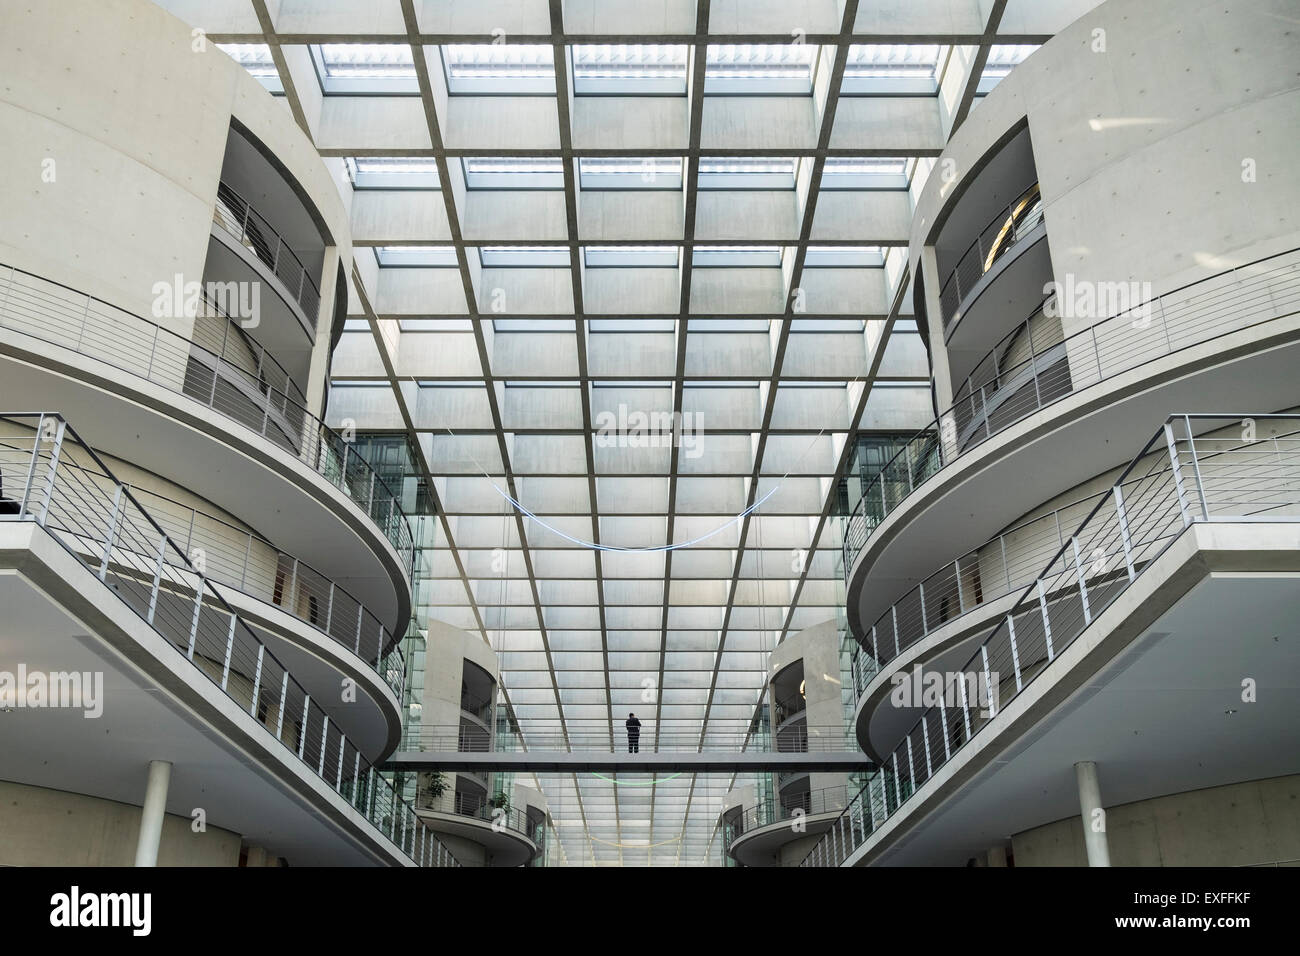 Interior of Paul Lobe Haus government building in Mitte Berlin Germany Stock Photo